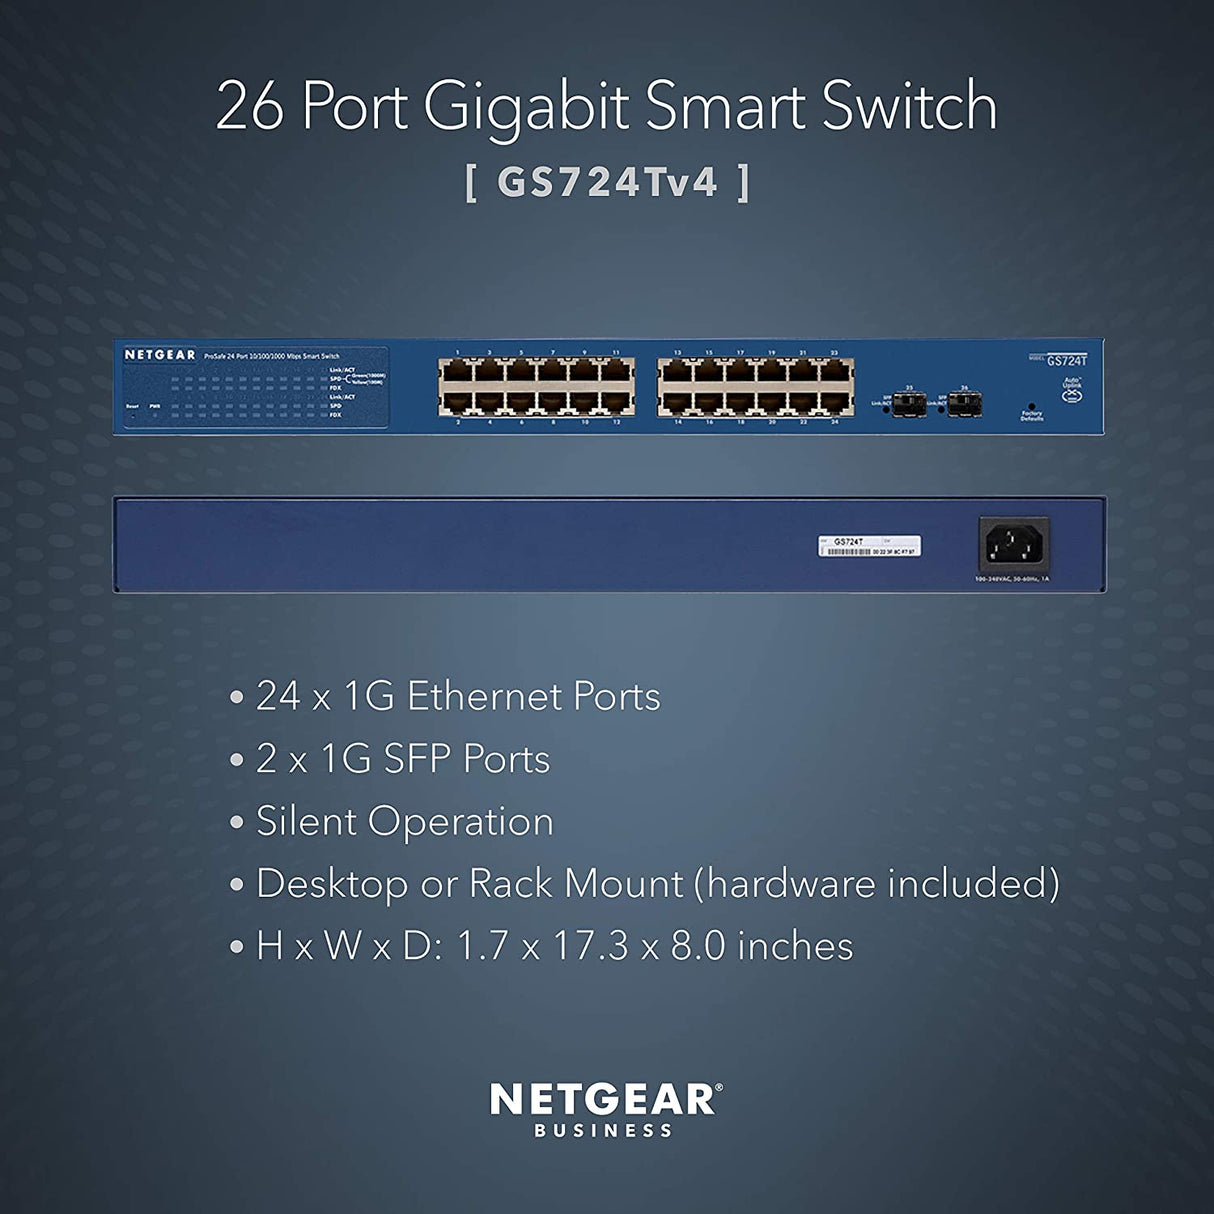 NETGEAR 26-Port Gigabit Ethernet Smart Switch (GS724Tv4) - Managed, with 24 x 1G, 2 x 1G SFP, Desktop or Rackmount, and Limited Lifetime Protection 24 port | 2xSFP